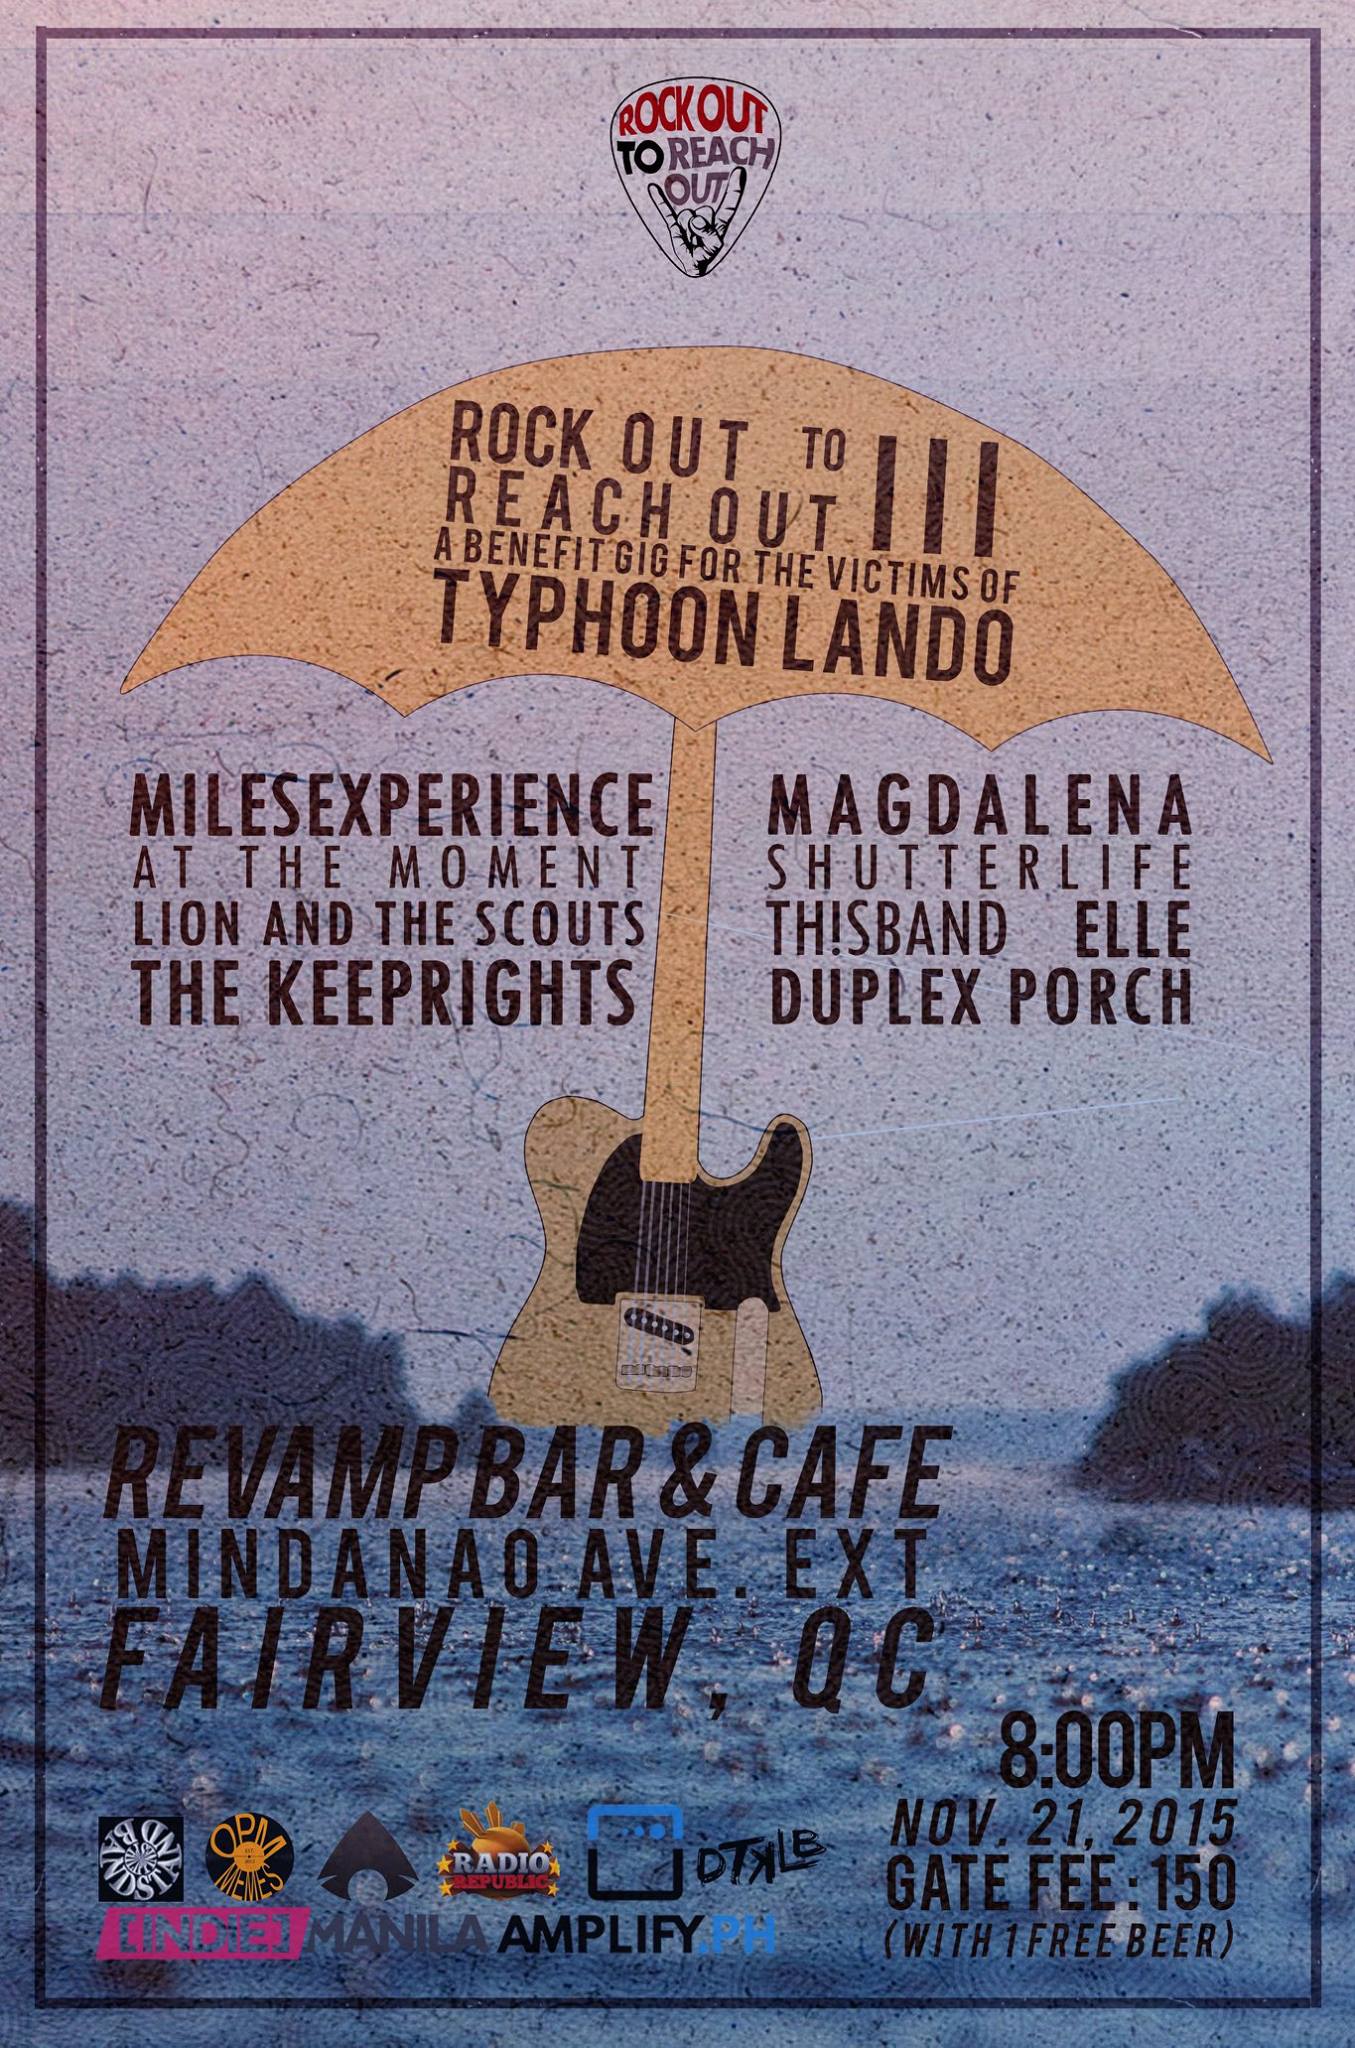 UPDATE UPDATE: Rock Out to Reach Out III A benefit gig for the victims of Typhoon Lando Dedicated to the town of San Luis, Aurora With performances by: Lion and the Scouts MilesExperience Shutter LIFE At The Moment Duplex Porch Magdalena The Keeprights ELLE / / e-lle Th!s Band Revamp Carwash CAFE | Blk 136 Lot 29-Mindanao Ave. Ext, Casa Milan, Fairview November 21 | Saturday 8PM onwards Tickets at P150 w/ 1 free drink. ALL PROCEEDS WILL GO THE VICTIMS OF THE CASUALTY If you have donations in forms of cash,goods or used clothing, please don't hesitate to drop it off at the event. smile emoticon RSVP: https://www.facebook.com/events/1728005760763714/ Super Mega Thanks to the following for the media support: Radio Republic Amplify.ph Bandstand Philippines Agimat: Sining at Kulturang Pinoy Indie Manila OPM memes poster by Rafael Carino - - - - DTKLB | Janelle Matias Photography #RockOutToReachOut #Part3 #SanLuisAurora #TyphoonLando